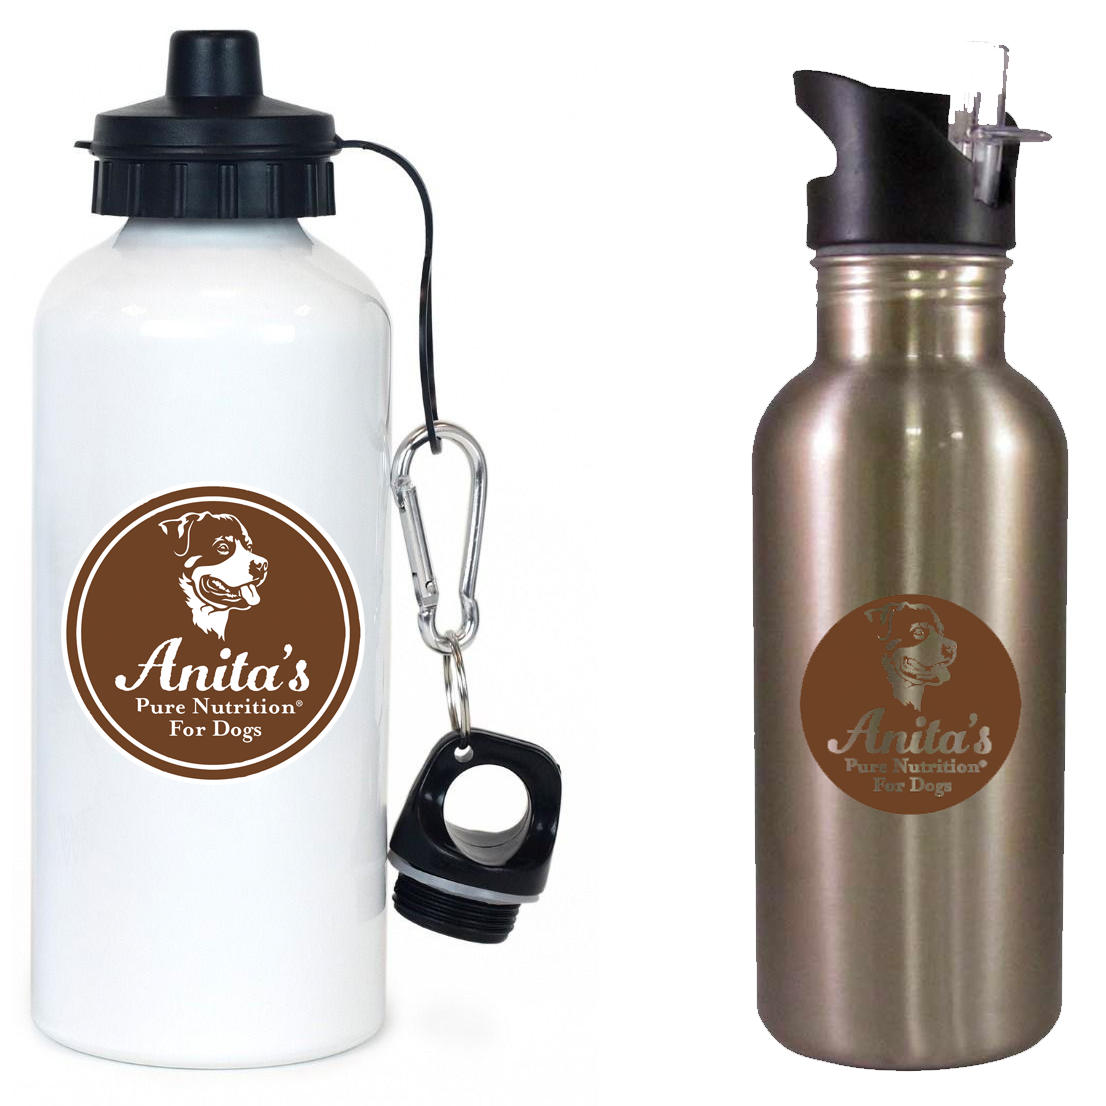 Anita's Pure Nutrition For Dogs Team Water Bottle